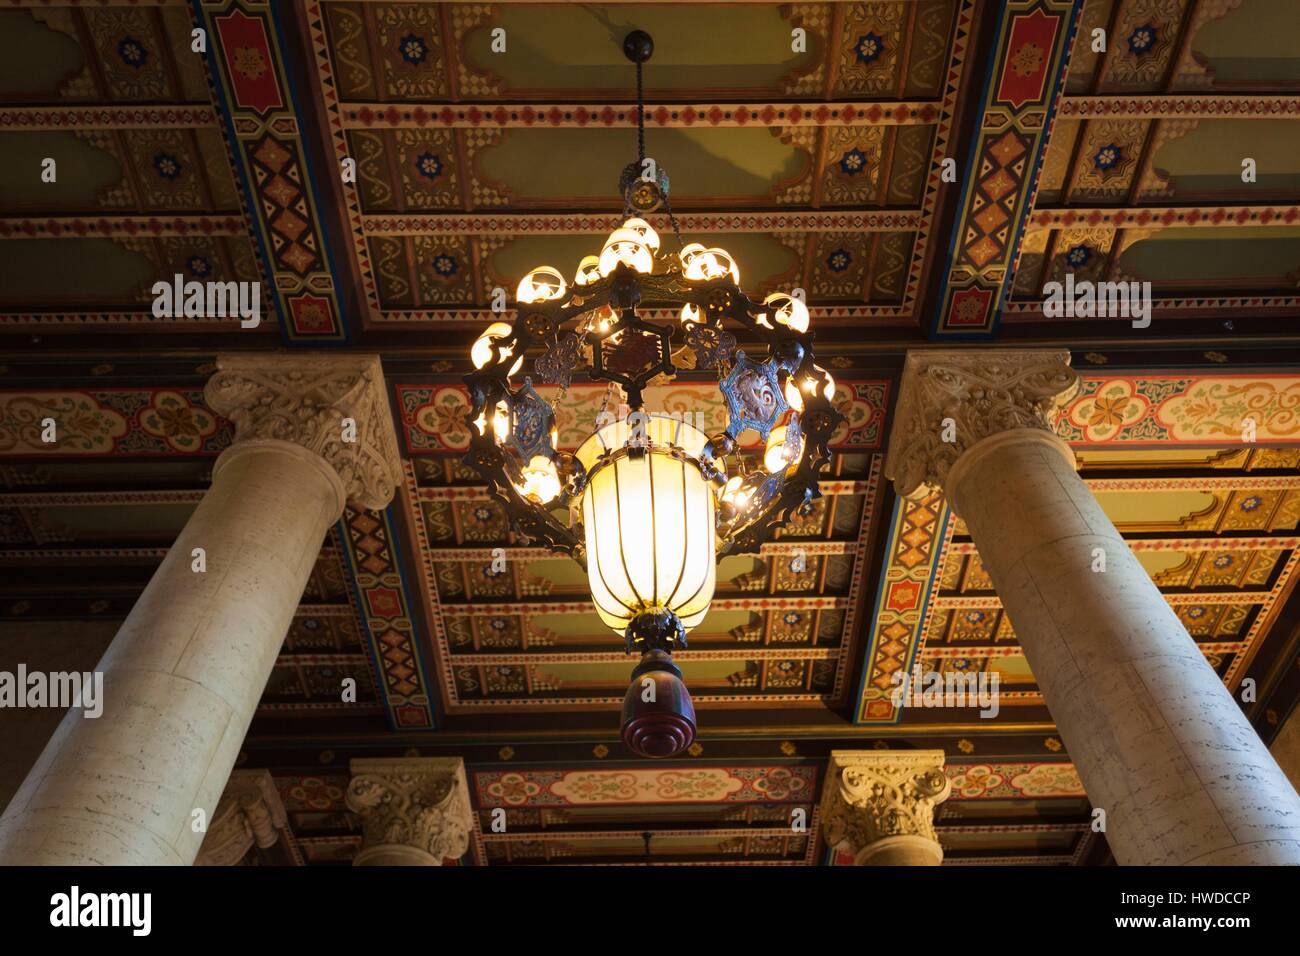 United States, Florida, Coral Gables, The Biltmore Hotel, lobby ceiling Stock Photo